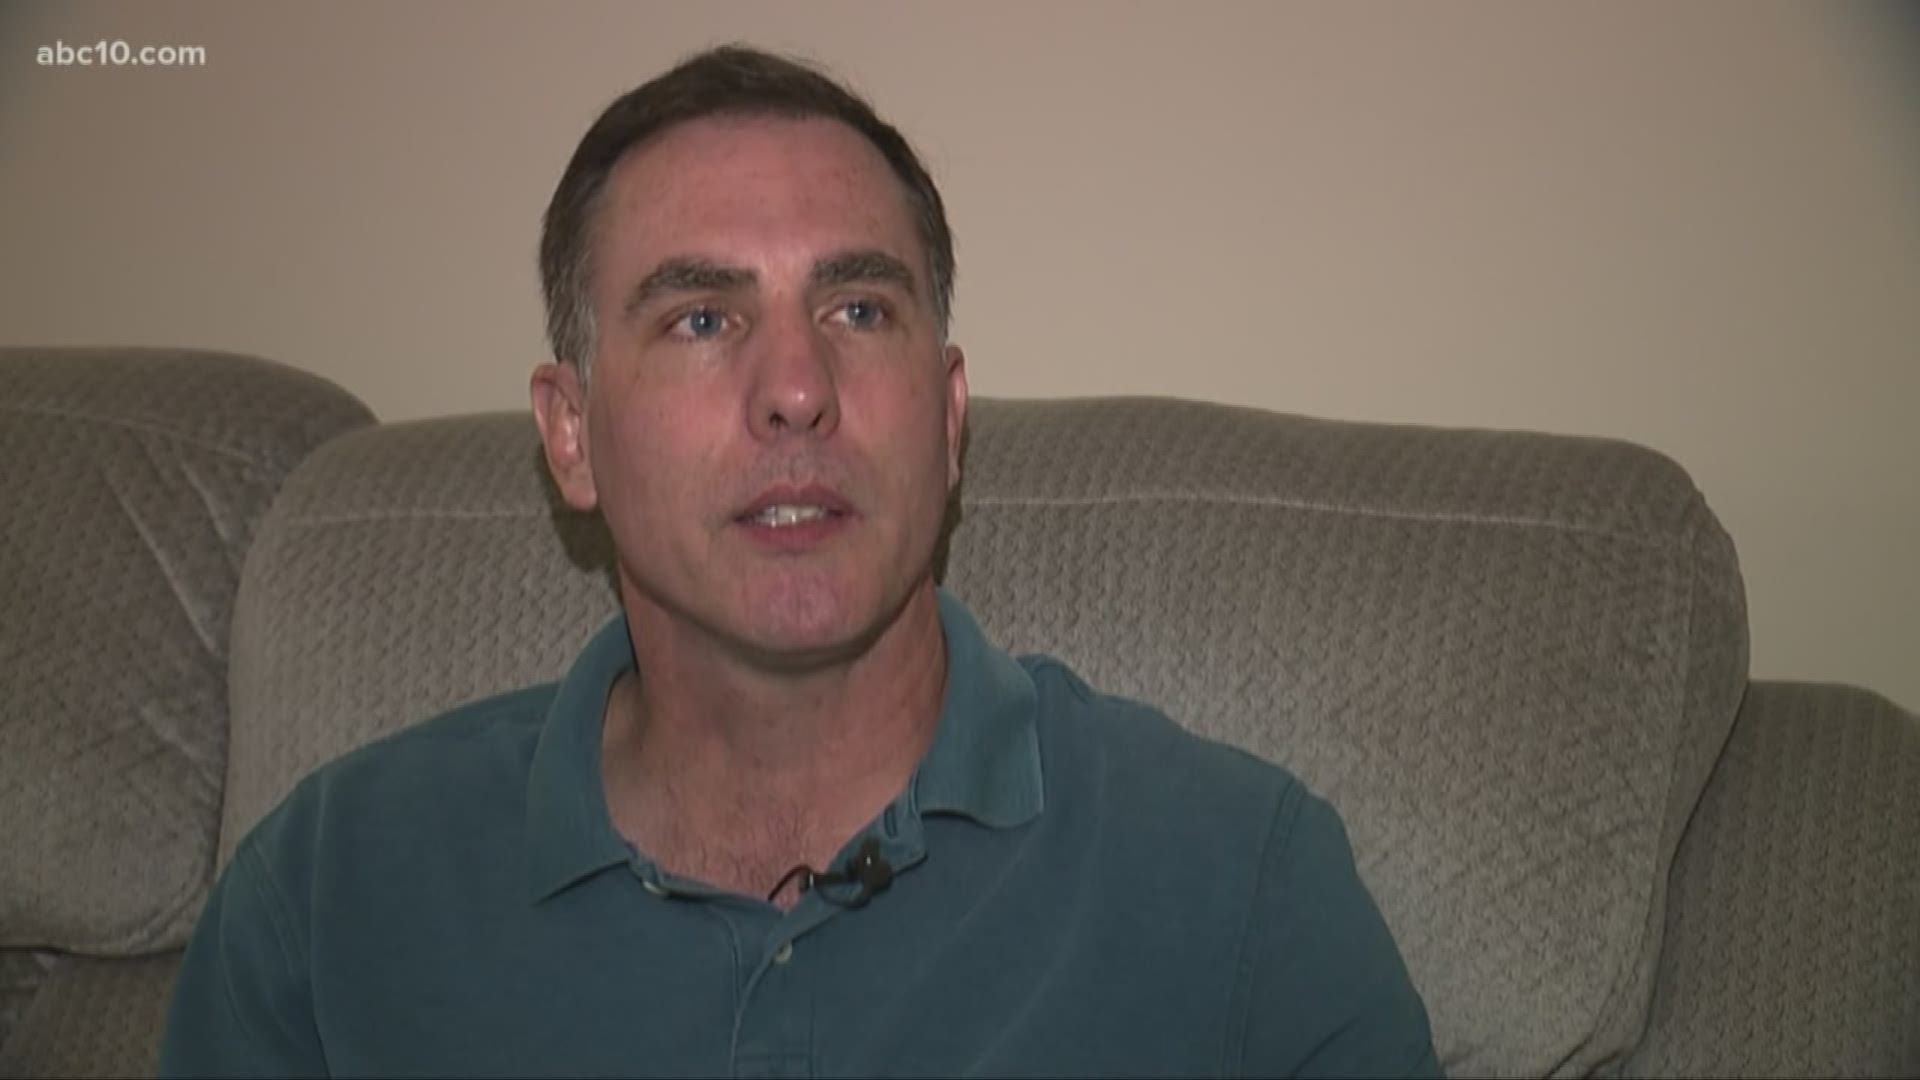 Some American quarantined at Travis Air Force Base over coronavirus fears will finally be allowed to go home on Tuesday. One man spoke with ABC10 about it.